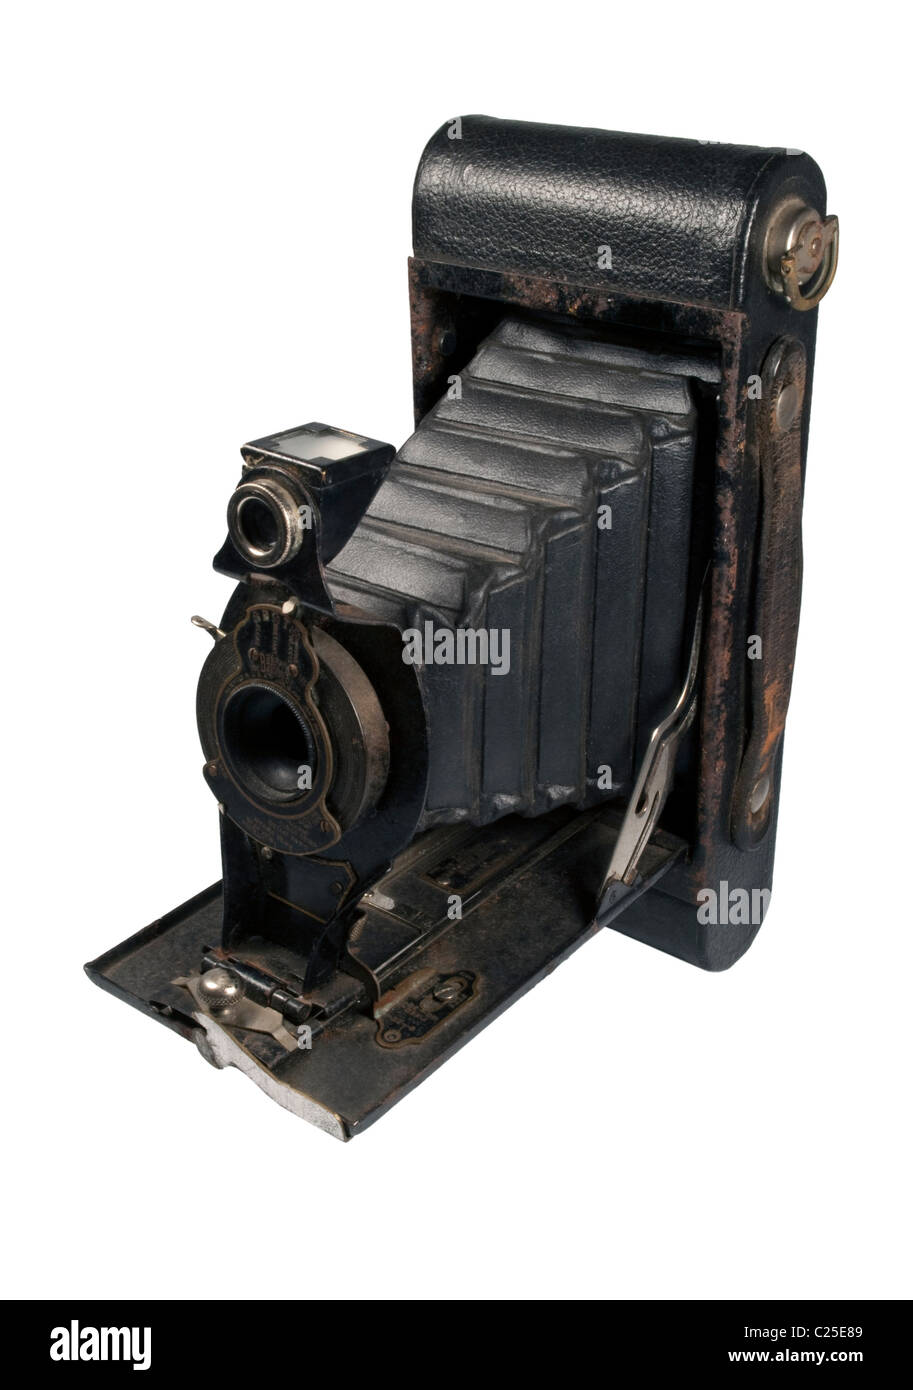 Closeup on the Old Vintage Foldable Camera on White Background Stock Photo